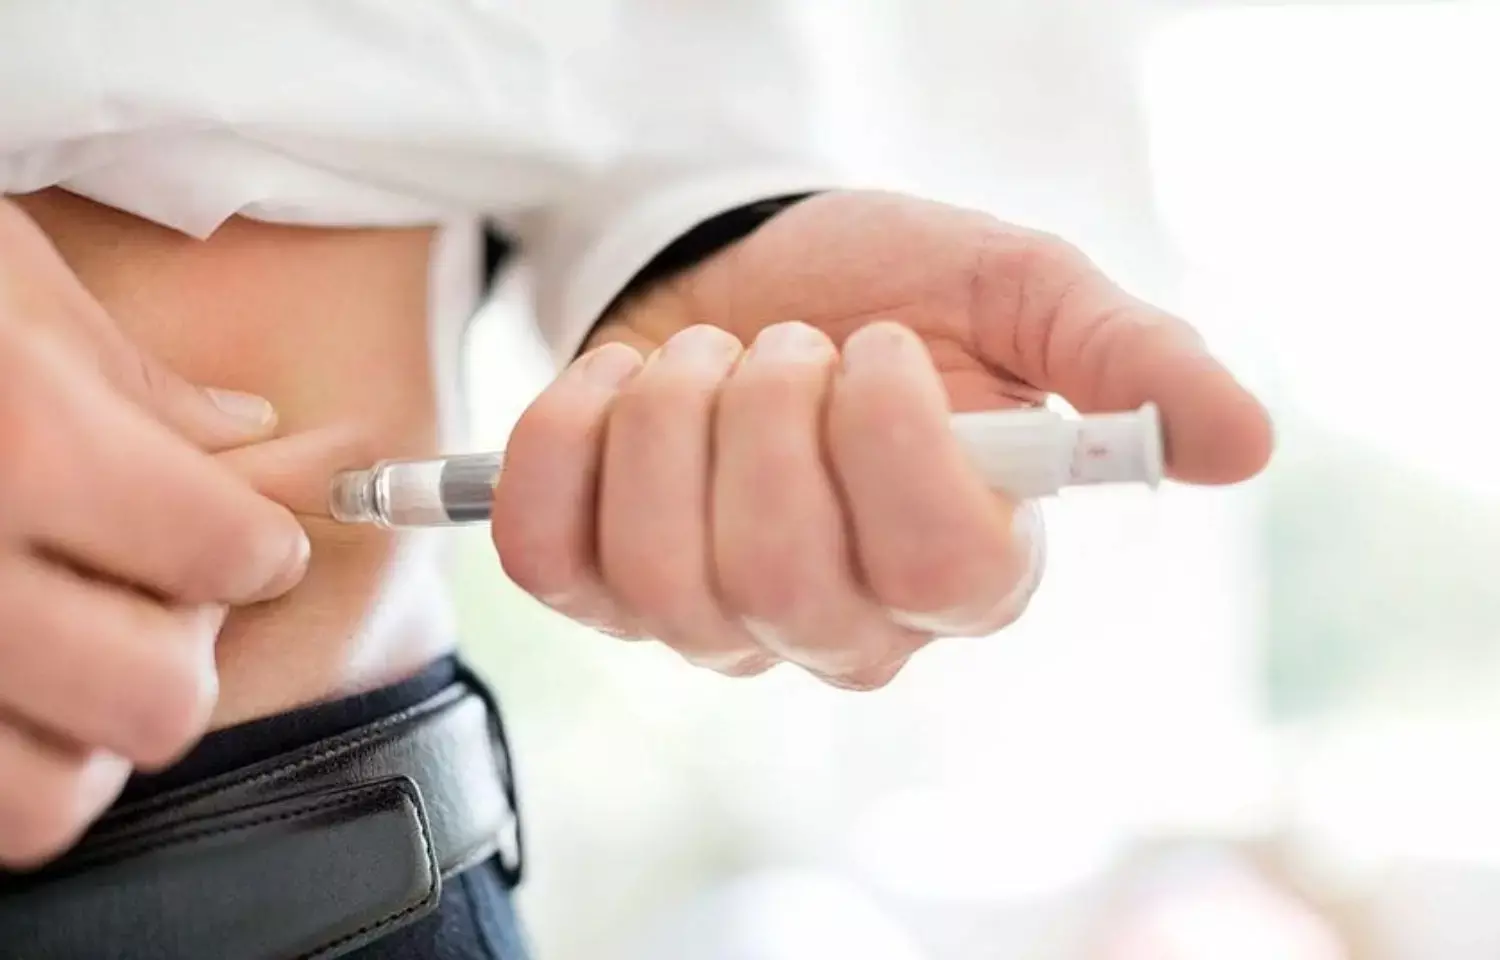 Daily usage of high insulin dose tied to cancer risk in type 1 diabetes: JAMA